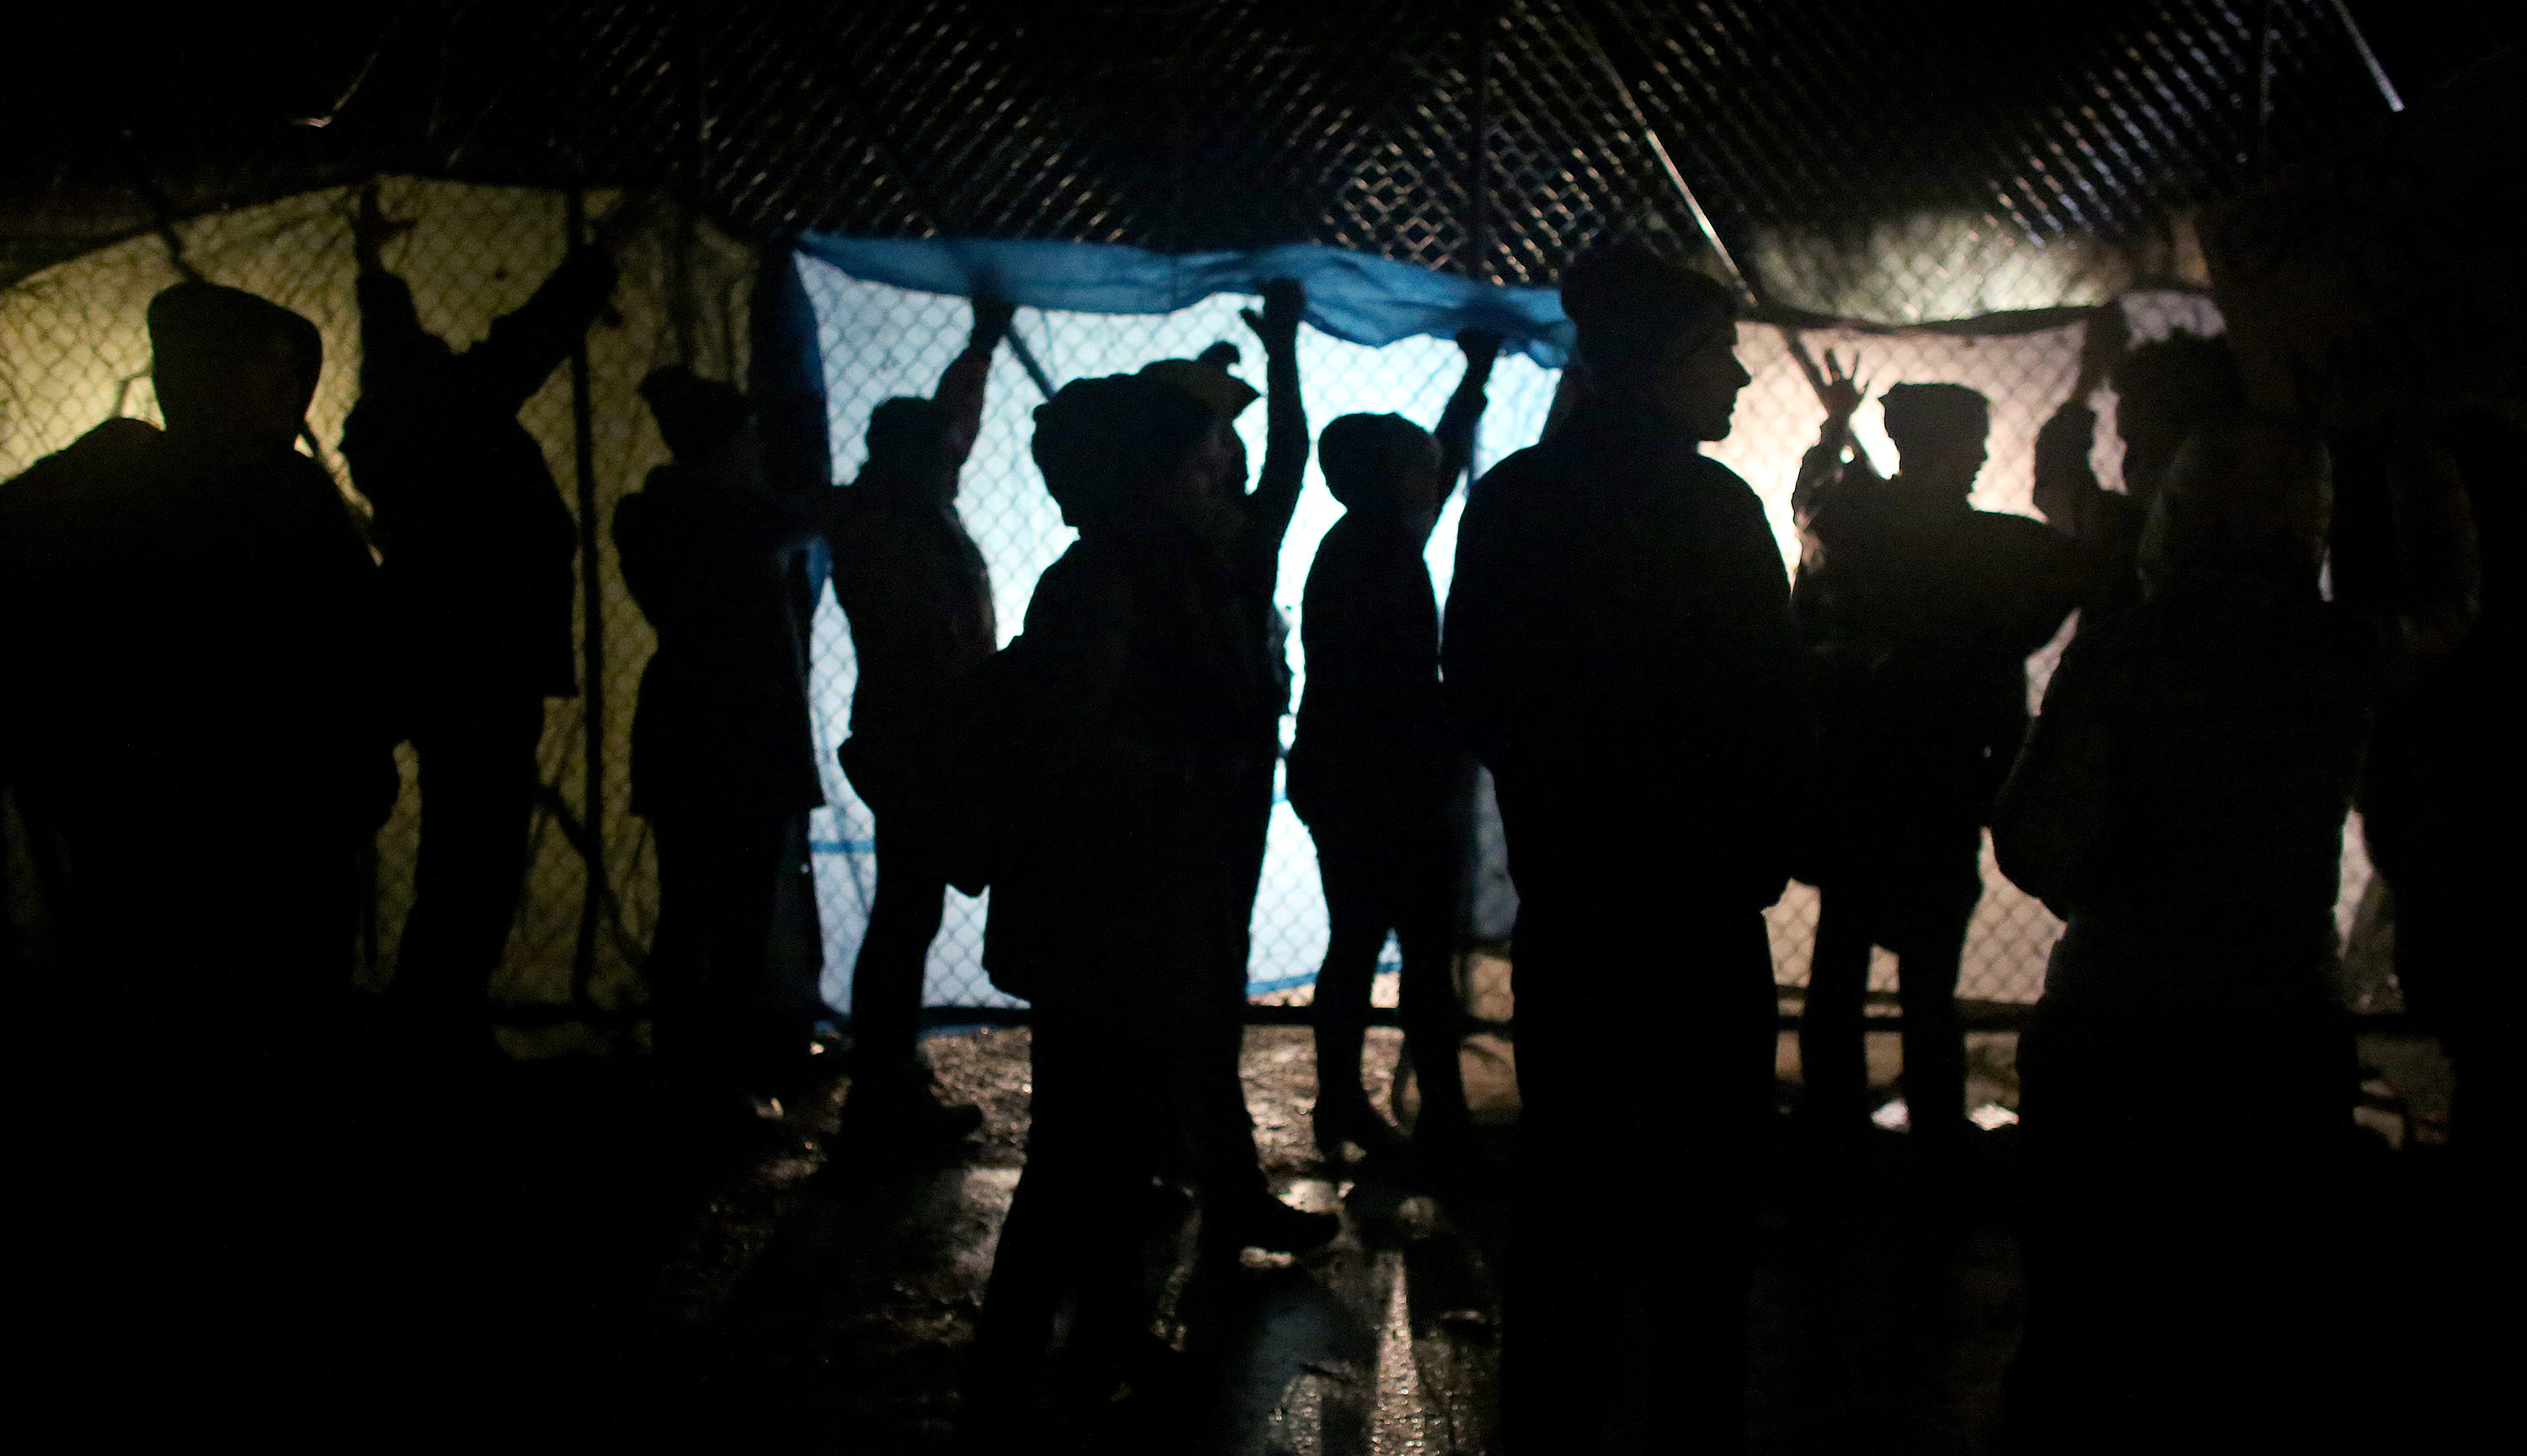 Protesters held up tarps against gated parking lot of the Minneapolis Fourth Precinct and chanted during their outside occupation outside surrounding area. ] (KYNDELL HARKNESS/STAR TRIBUNE) kyndell.harkness@startribune.com Black Lives Matter protested in front of Minneapolis Fourth Precinct in Minneapolis Min., Wednesday November 18, 2015.